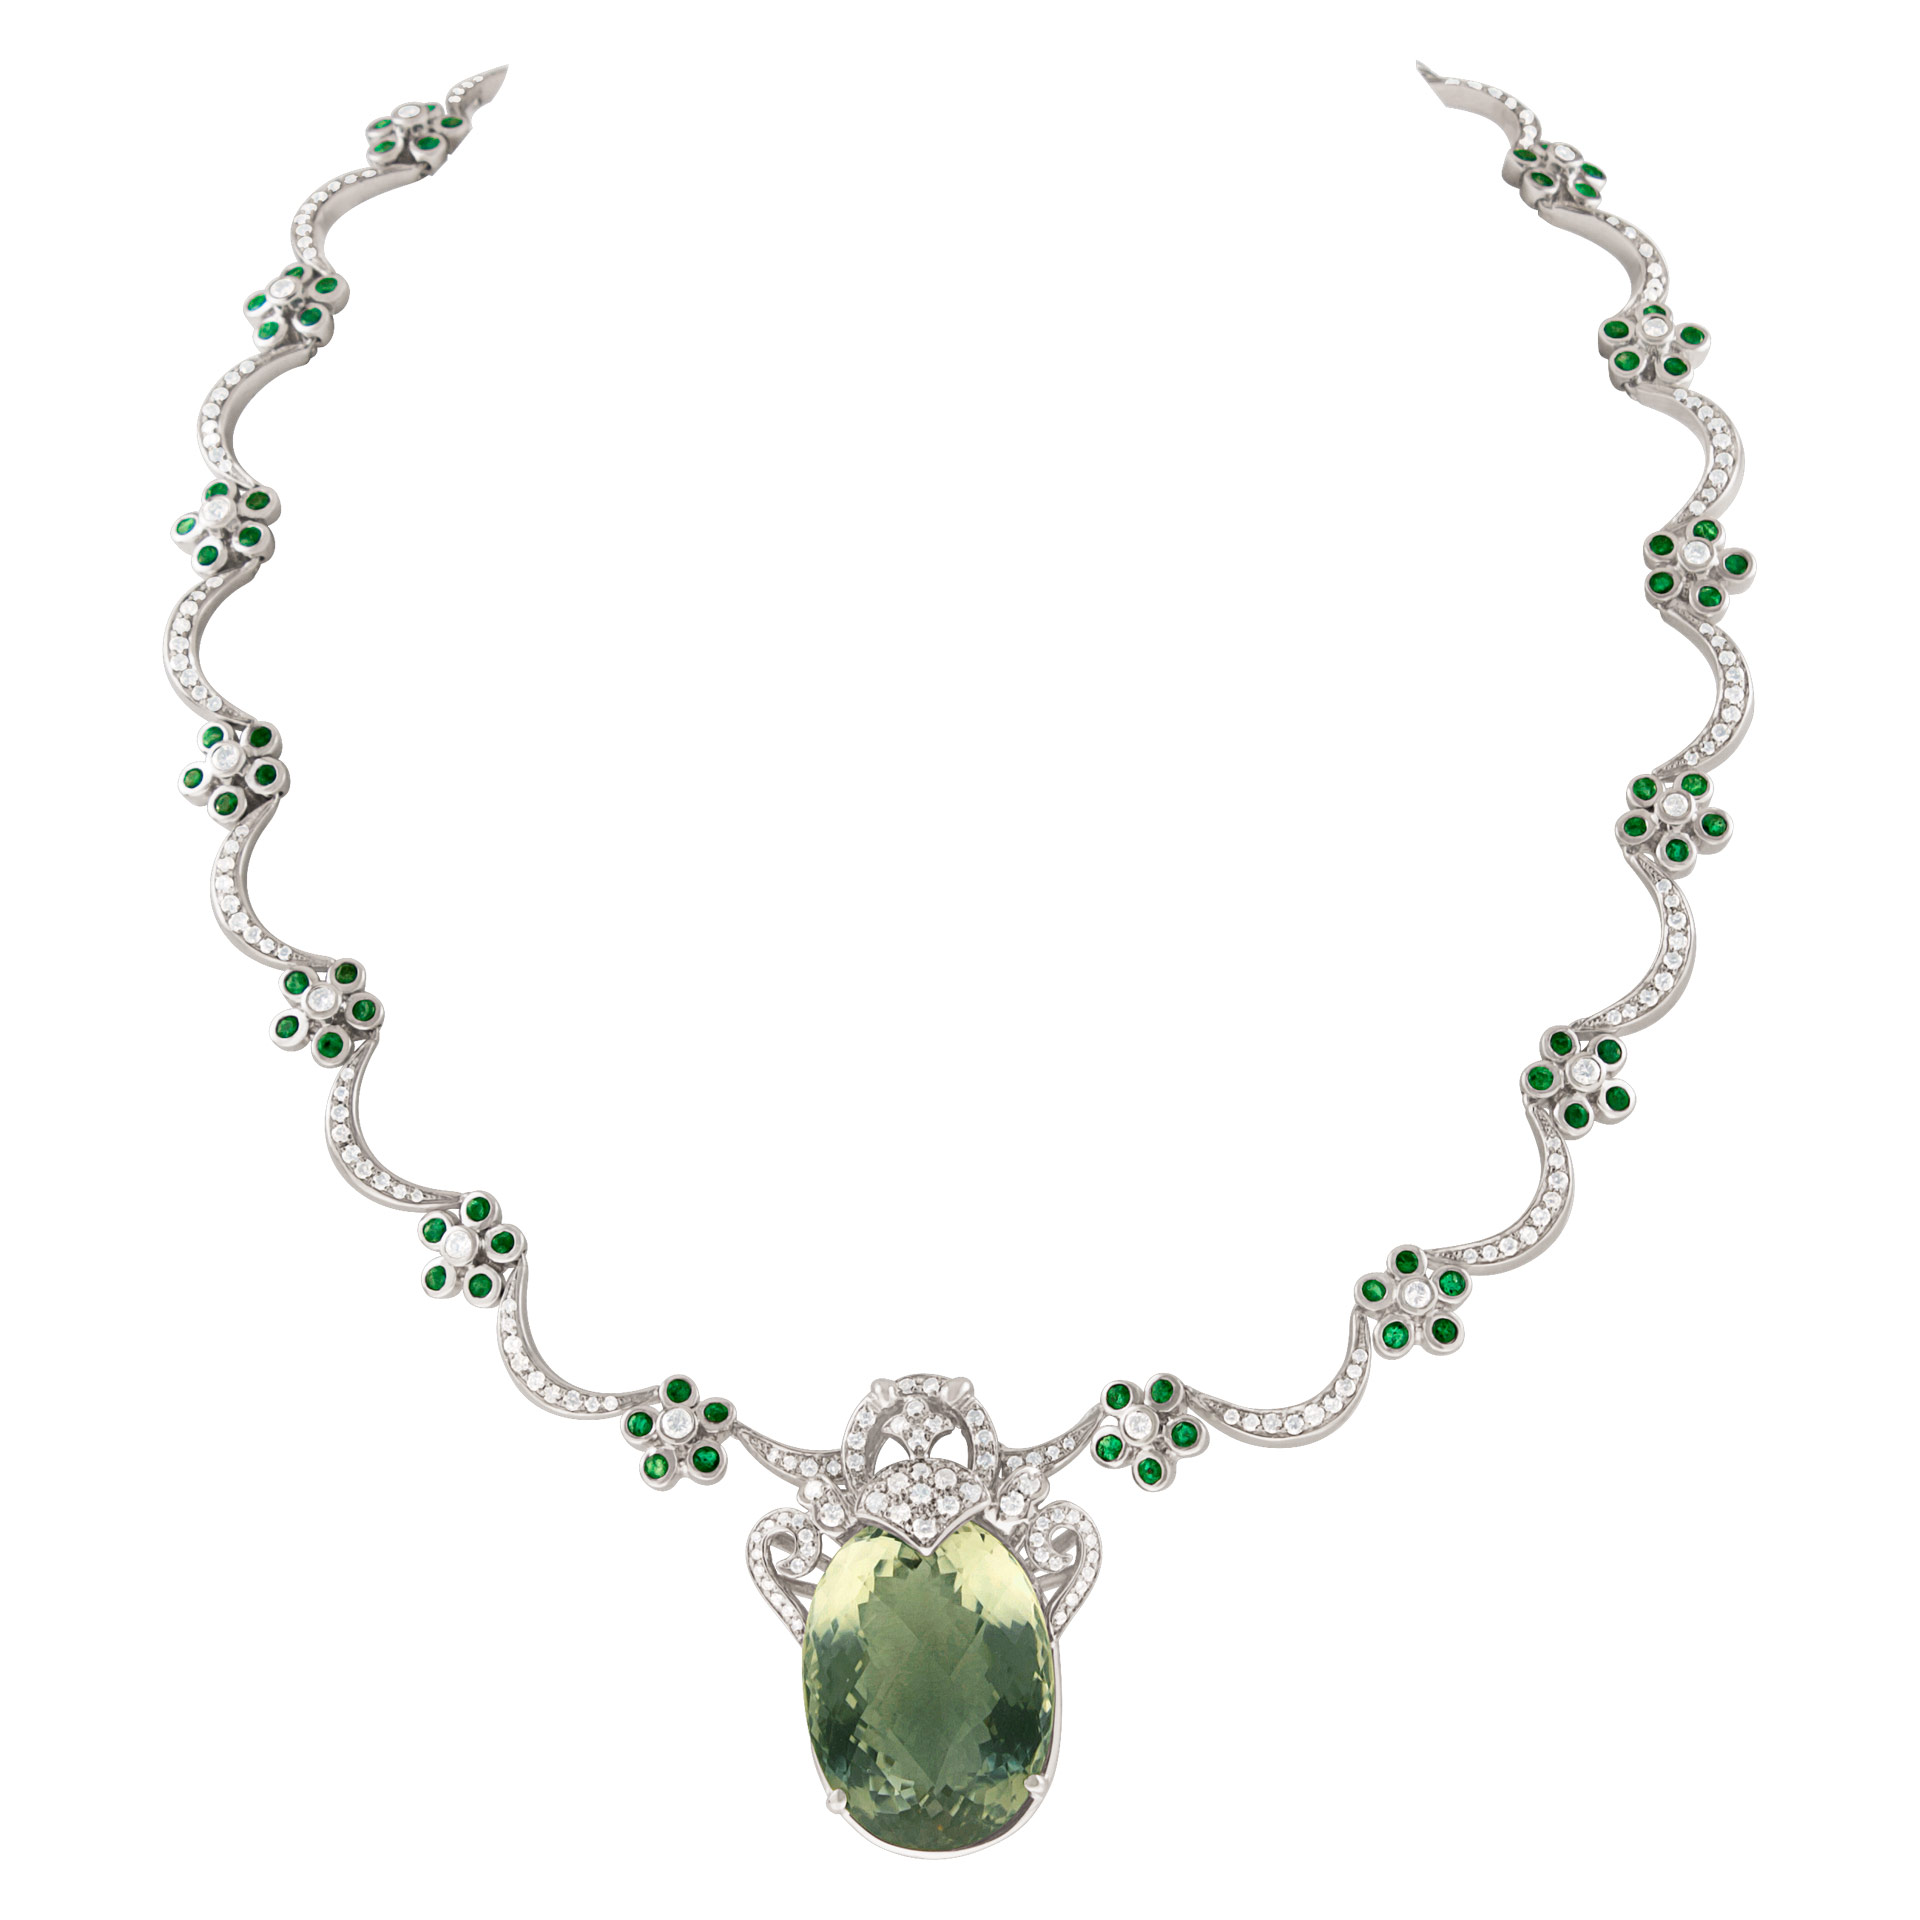 Green amethyst, diamond & emerald necklace in 14k white gold image 1